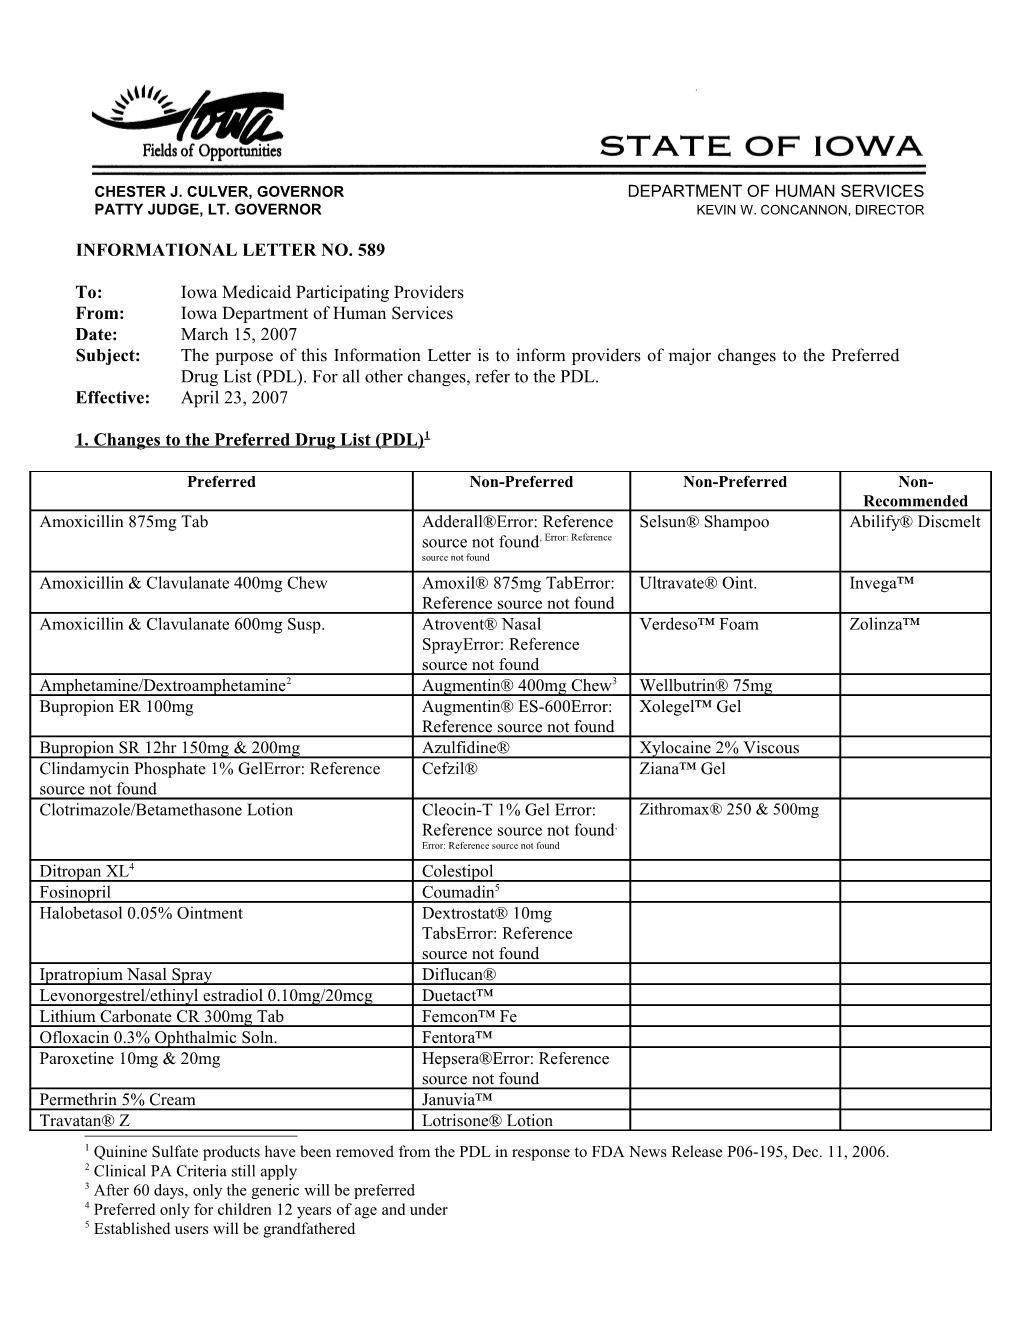 Department of Human Services Letterhead s4